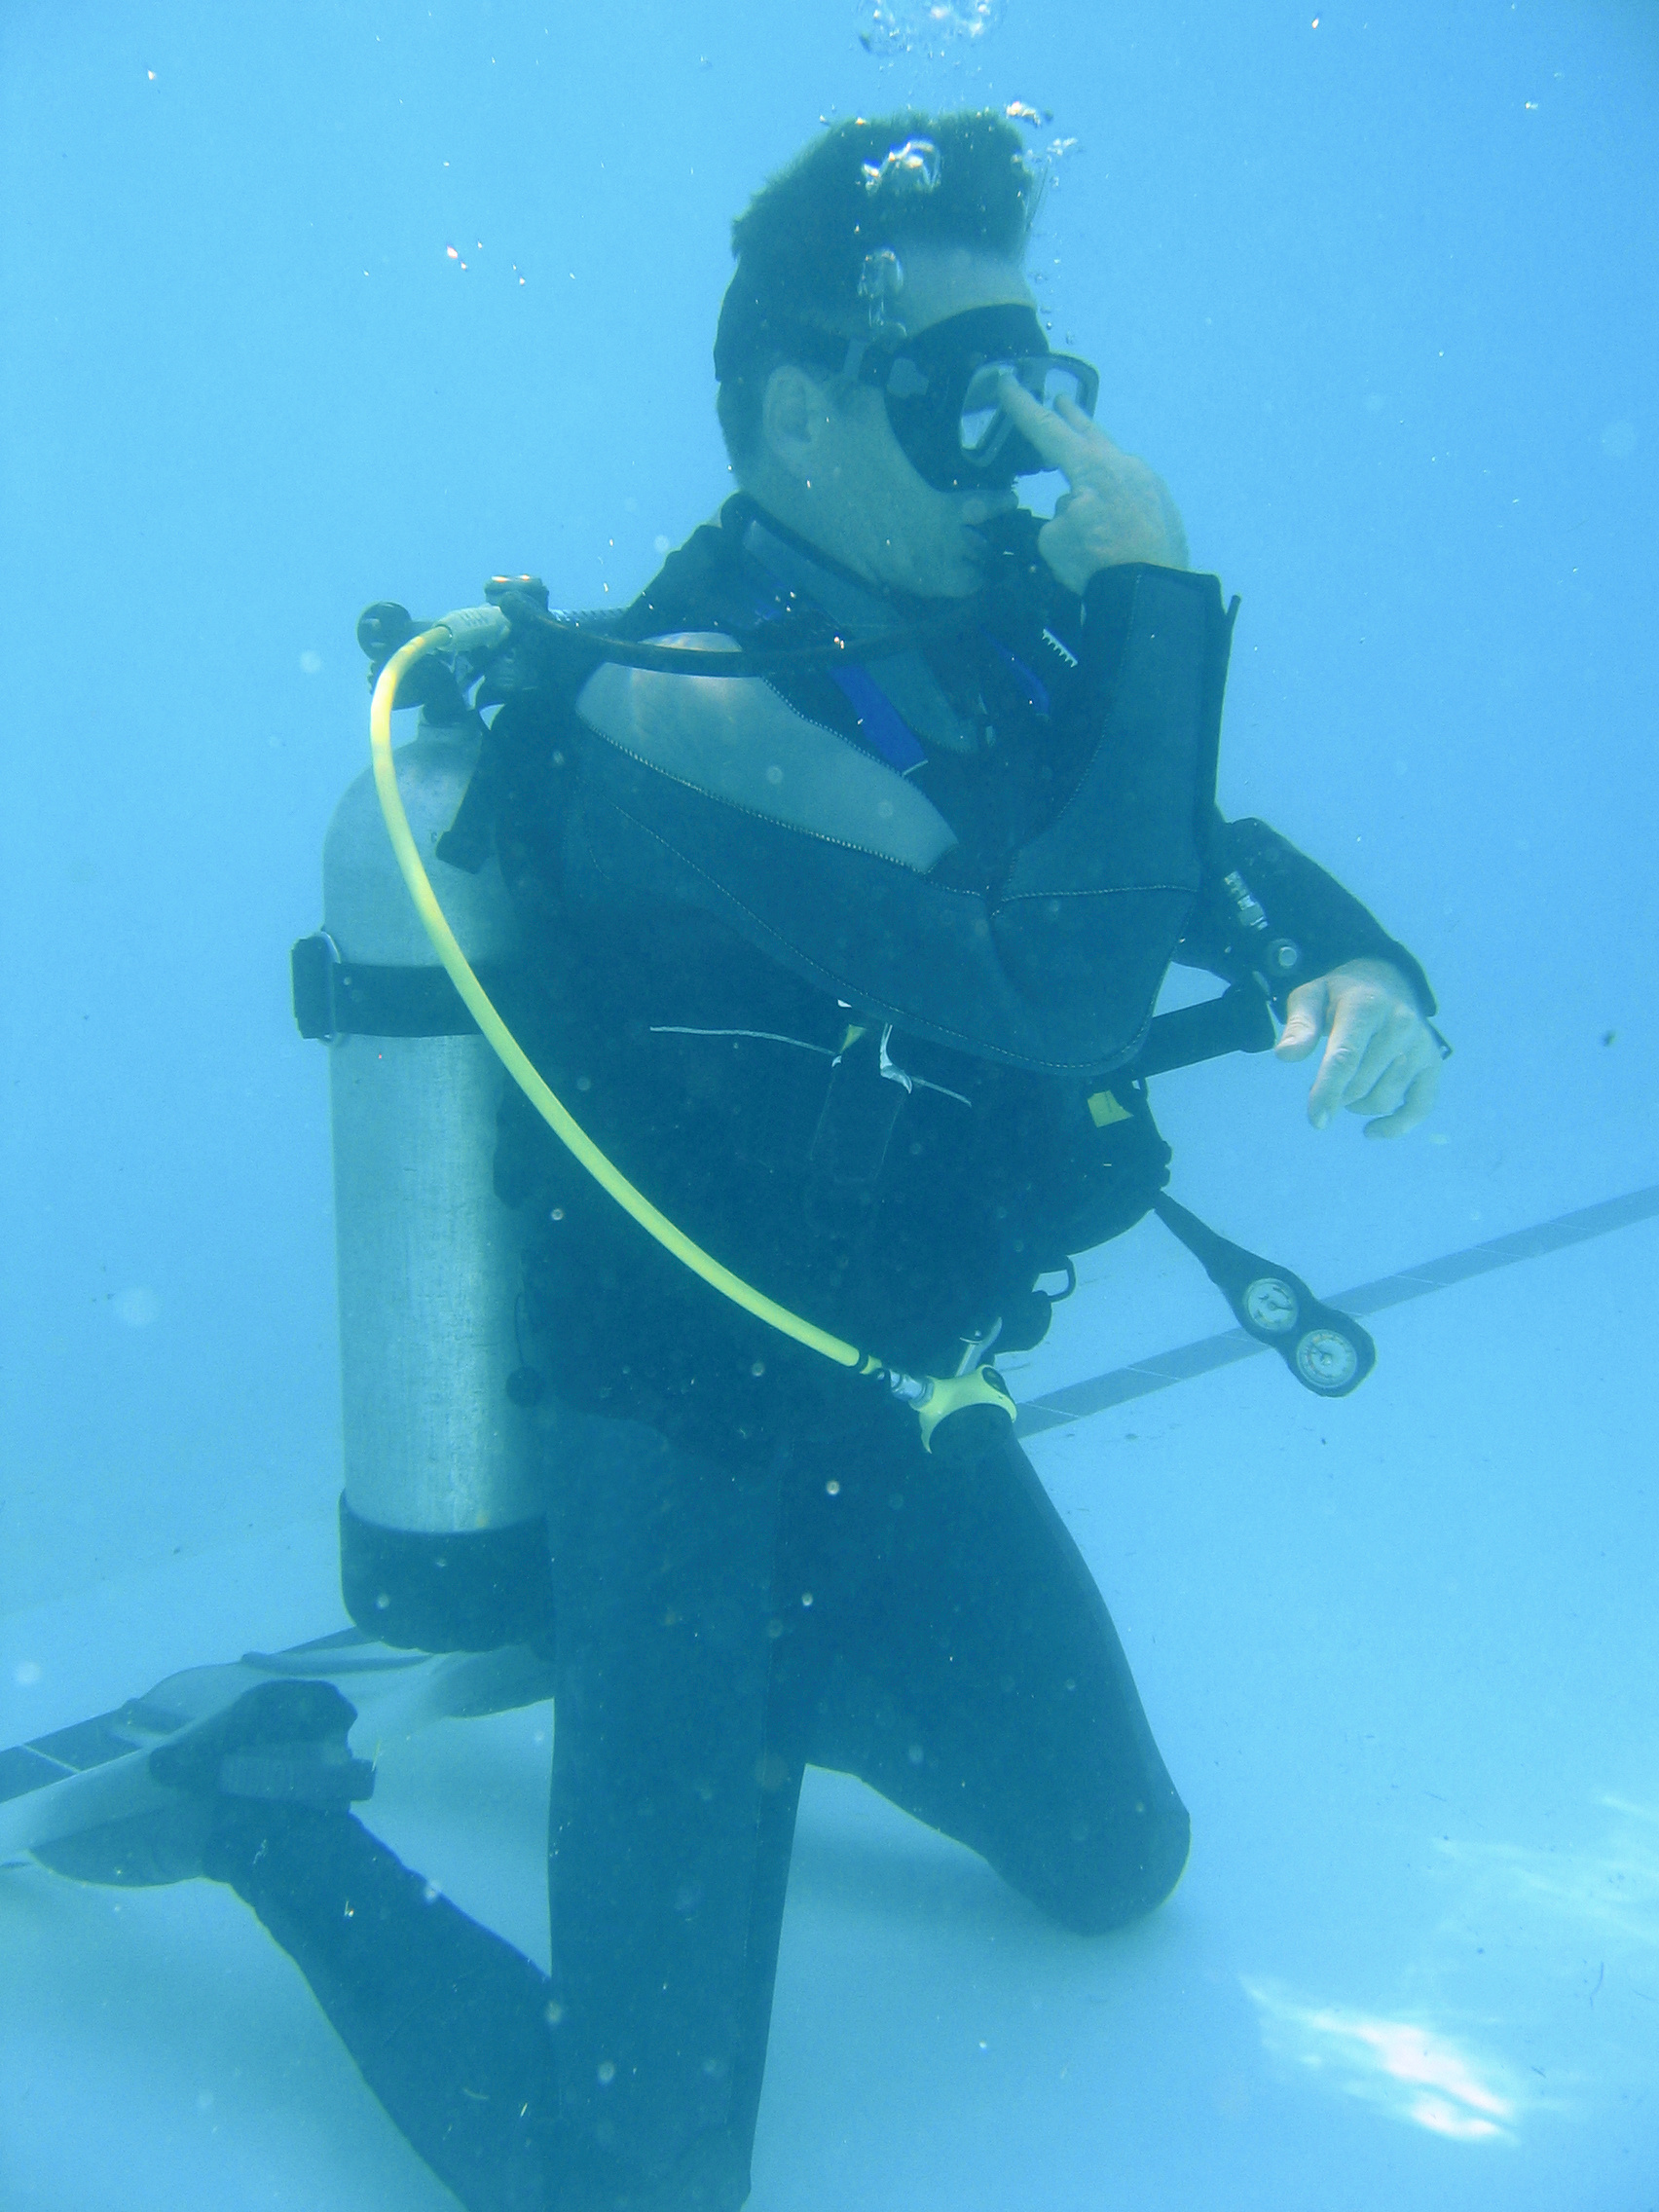 Scuba instructor utilizes the look scuba hand signal to capture the attention of his dive students in a pool environment